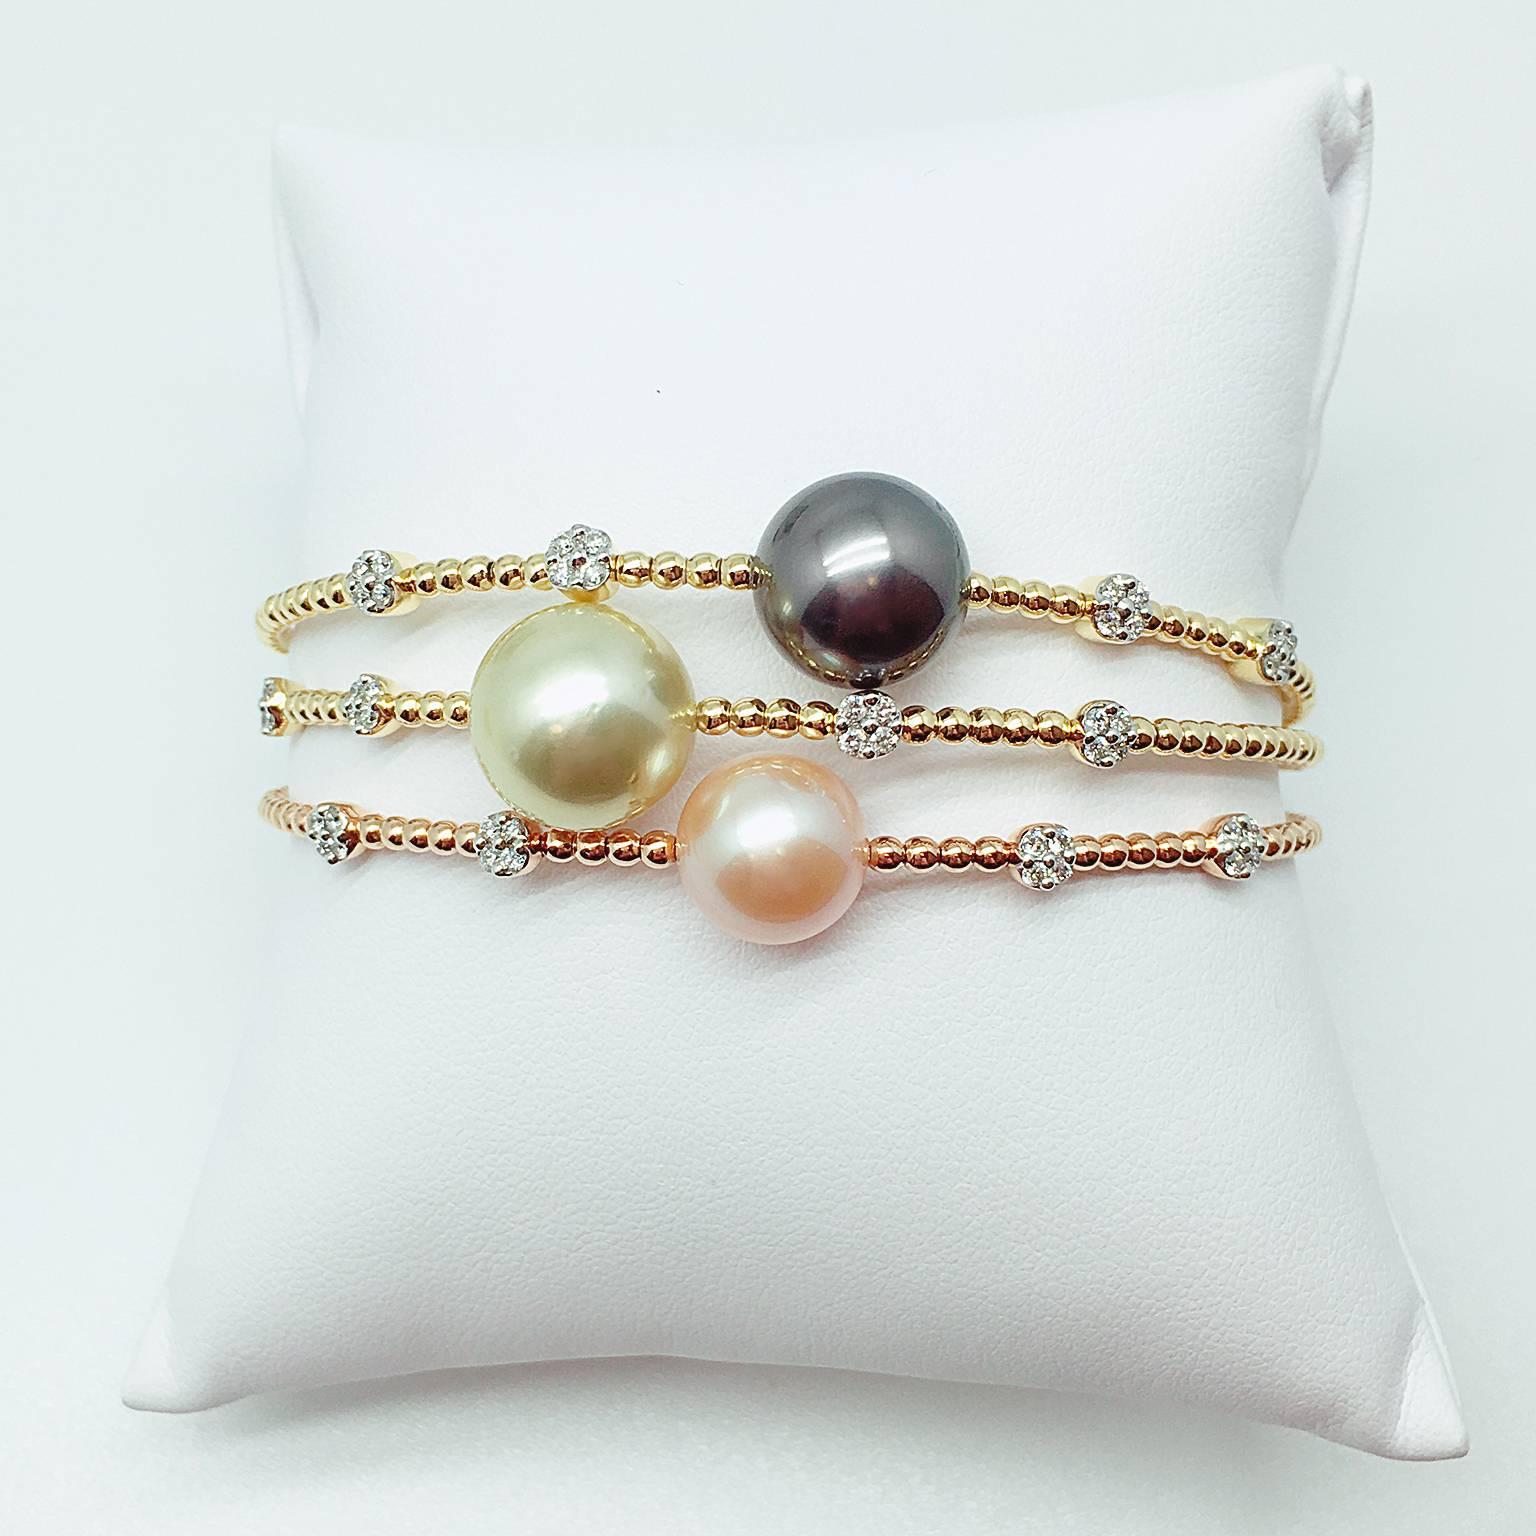 Tahitian Pearl: 11.8mm
White Diamond: 0.19 carat
Set in 18K Yellow Gold

Matching bangles with Gold southsea pearl and freshwater pearl also available.